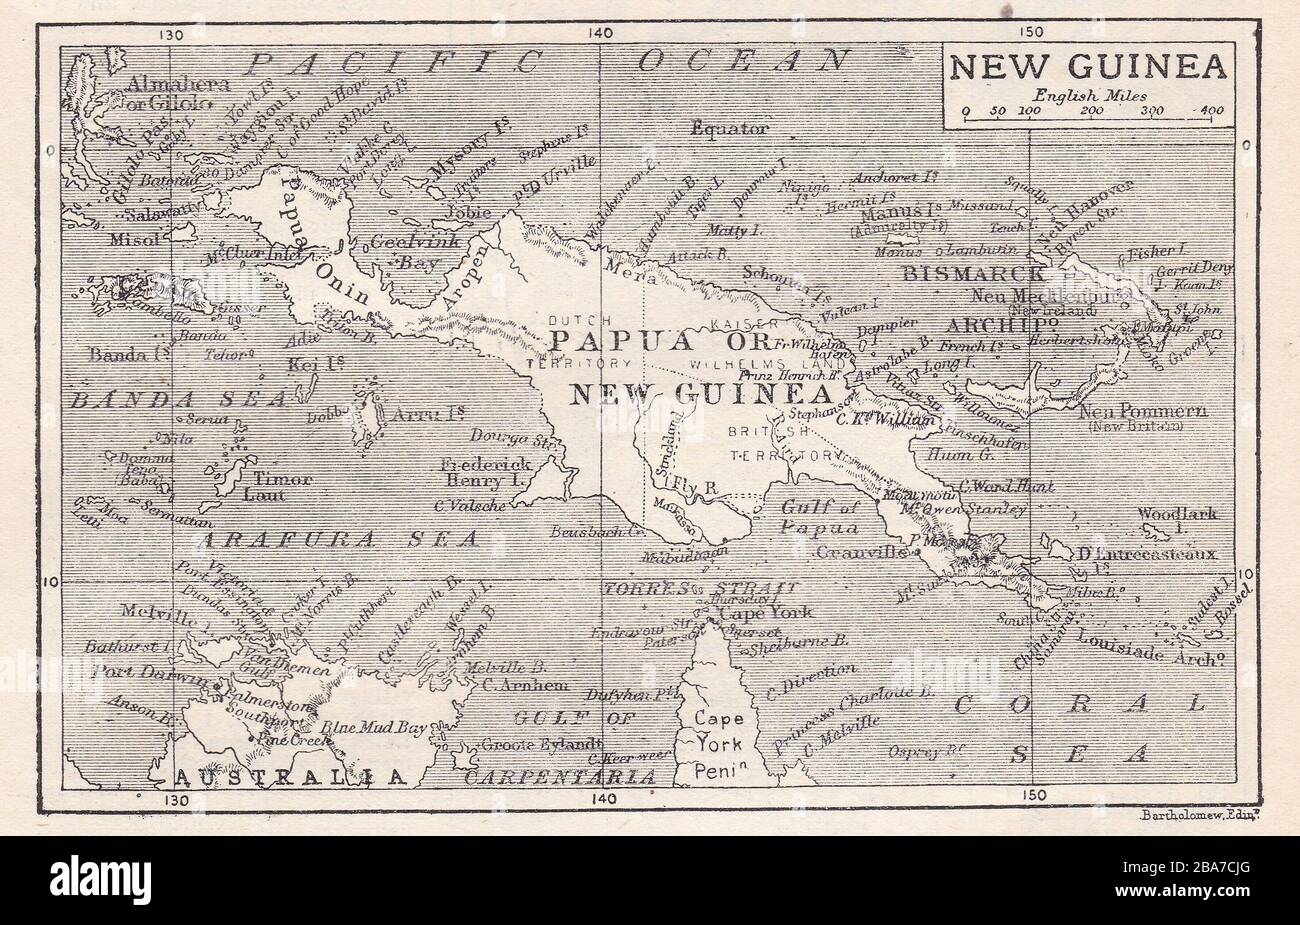 Vintage map of New Guinea, 1900s. Stock Photo